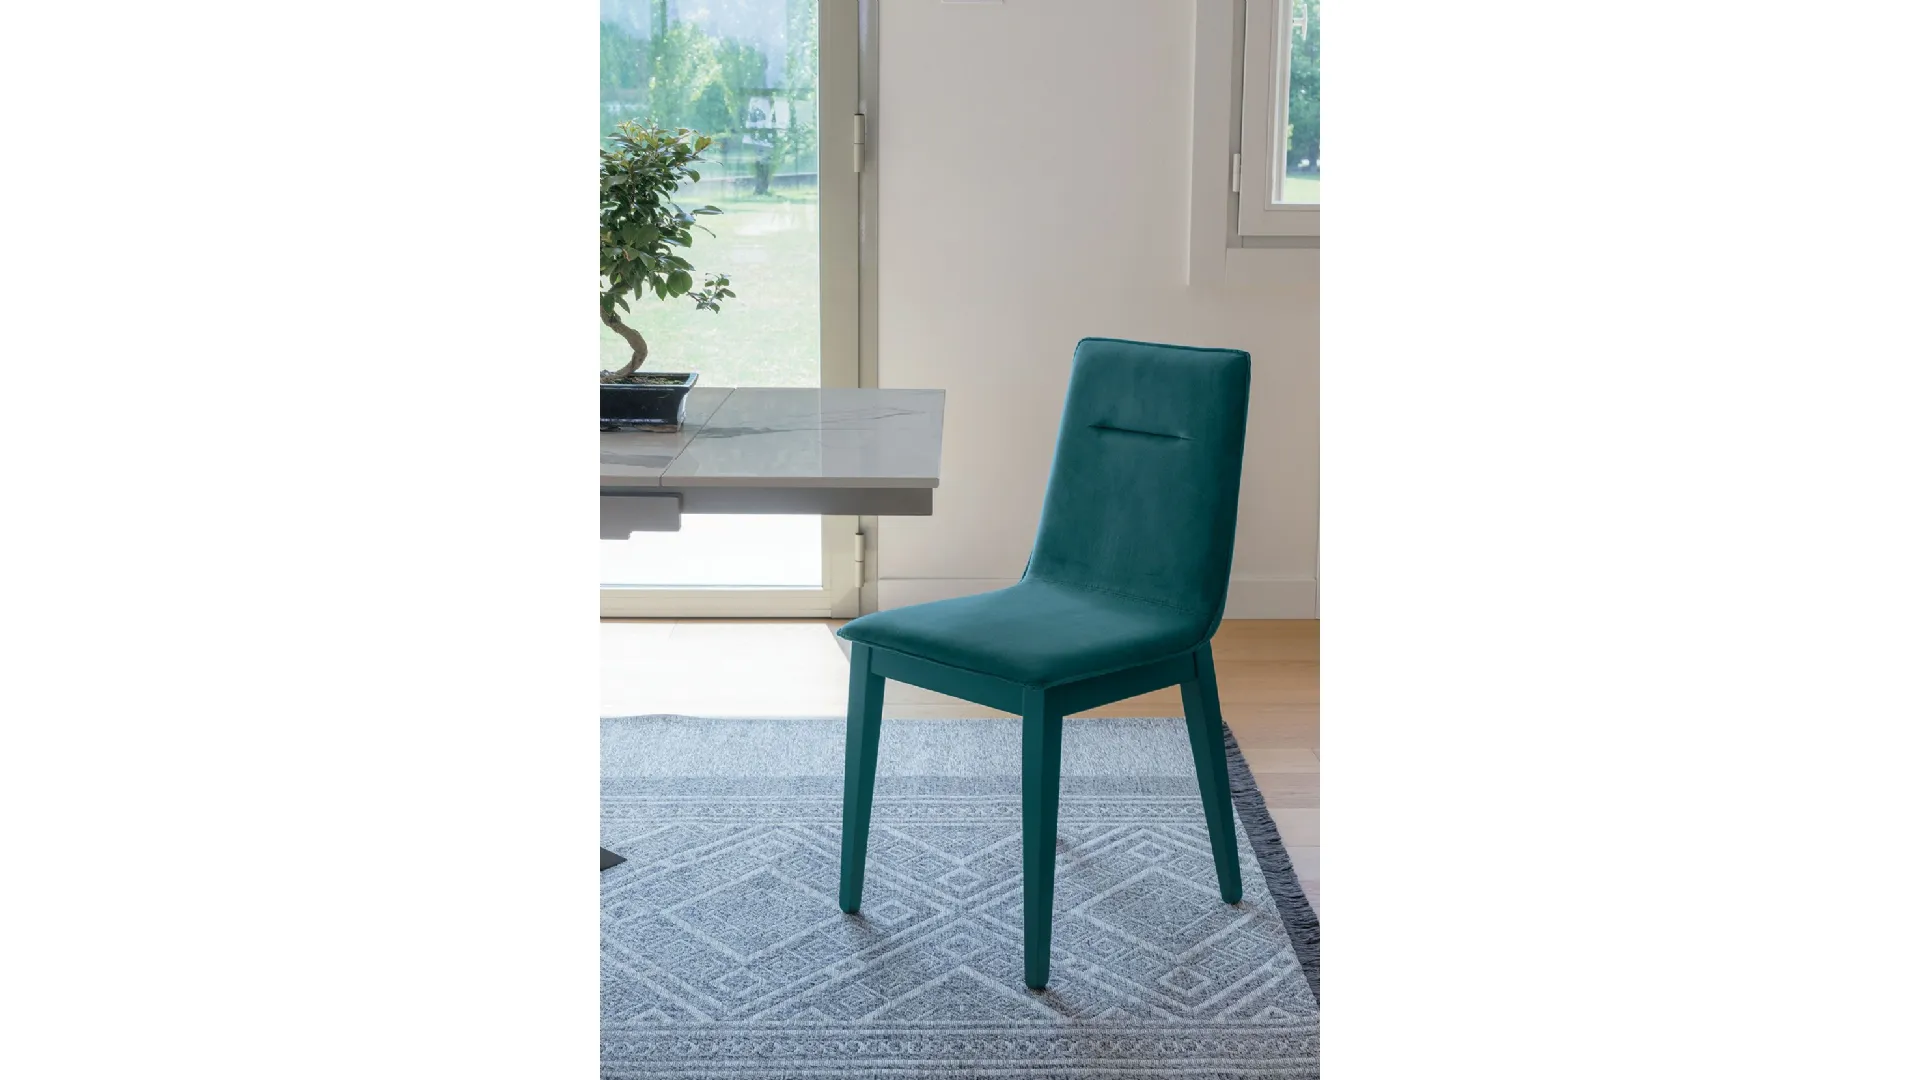 Modern chair in microfiber with a velvet effect.